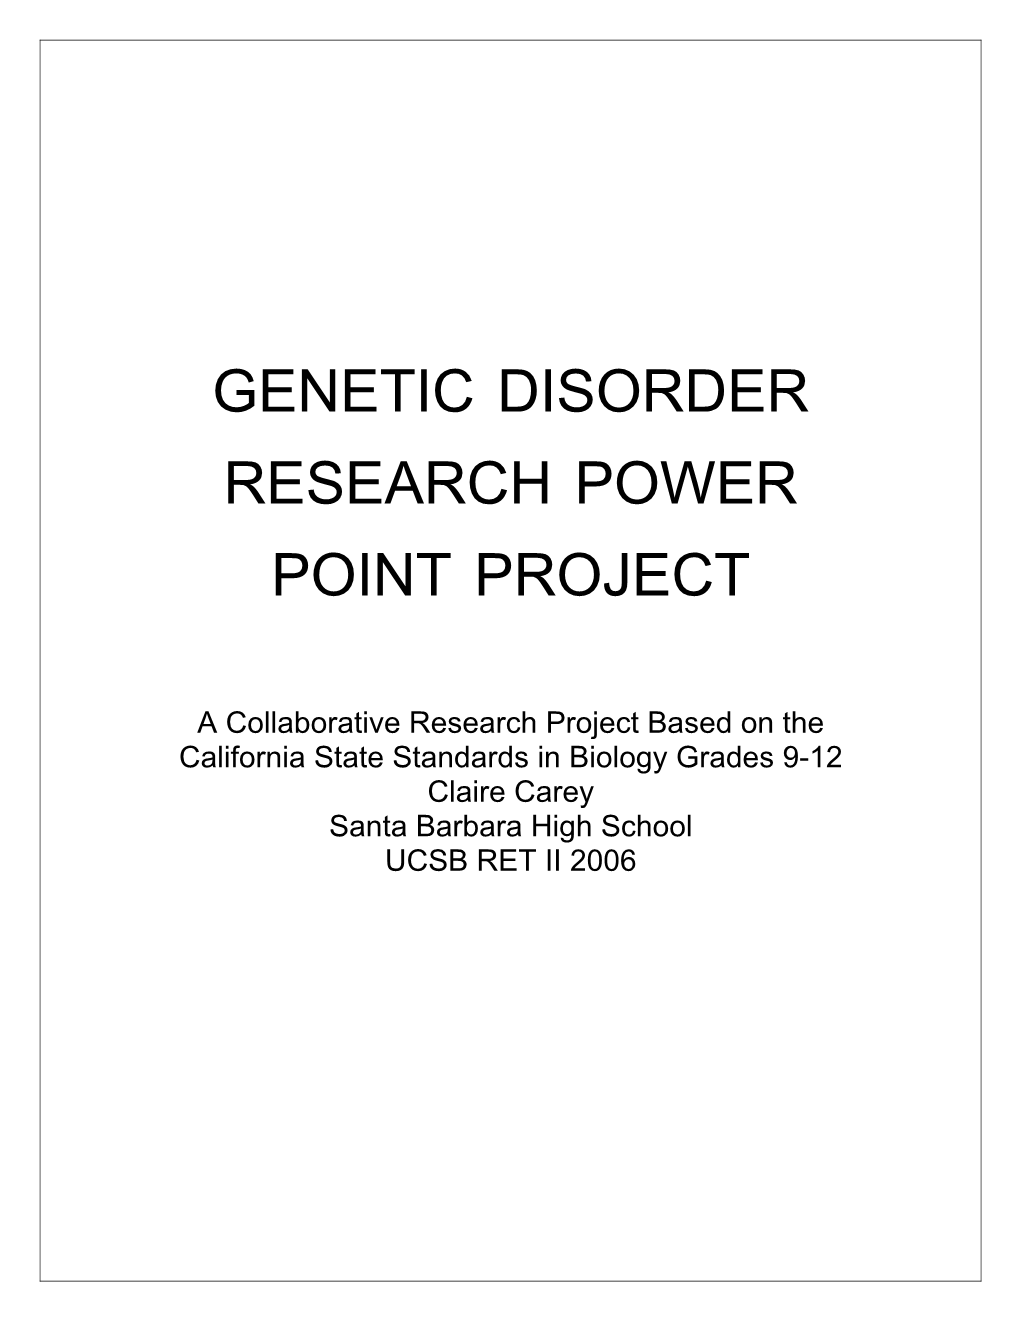 Genetics Disorder Research Project